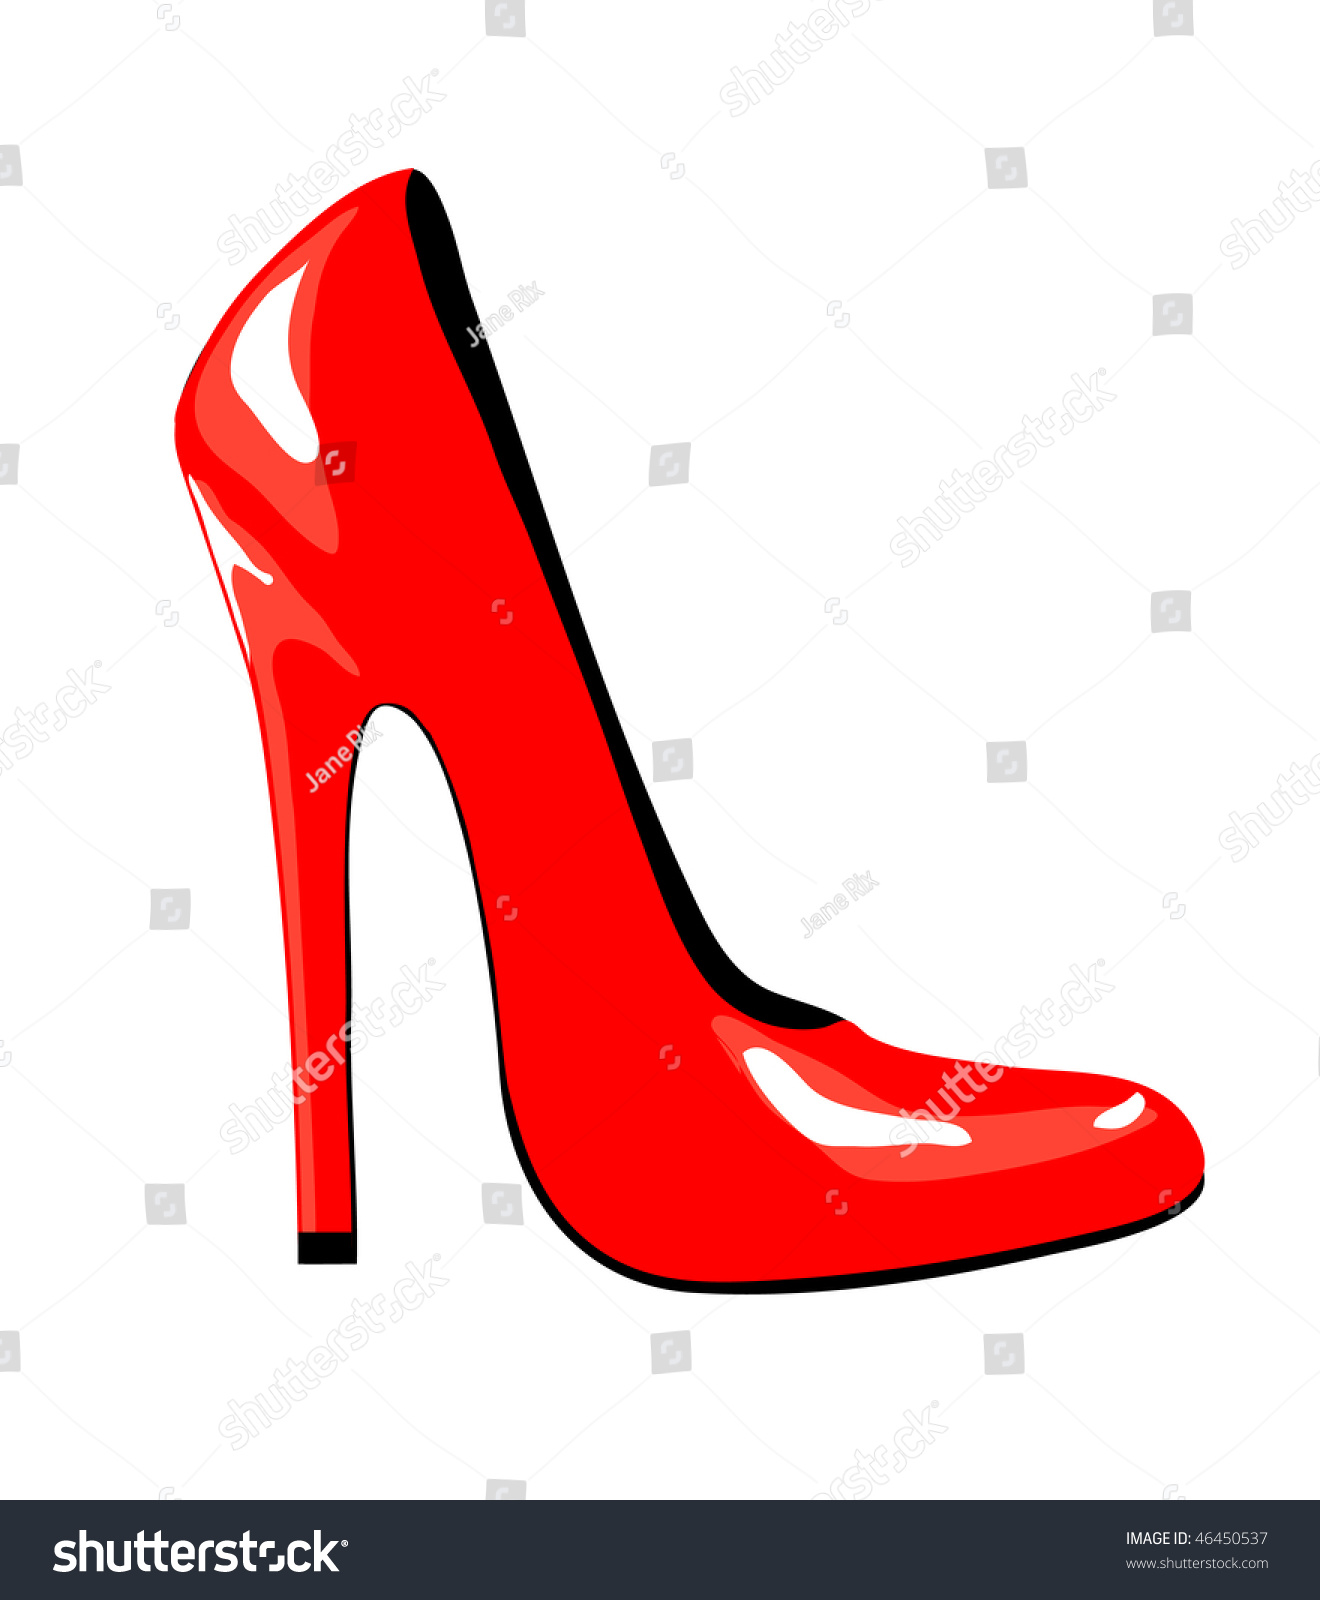 A Vector Illustration Of A Sexy High-Heeled Red Shoe Isolated On White ...